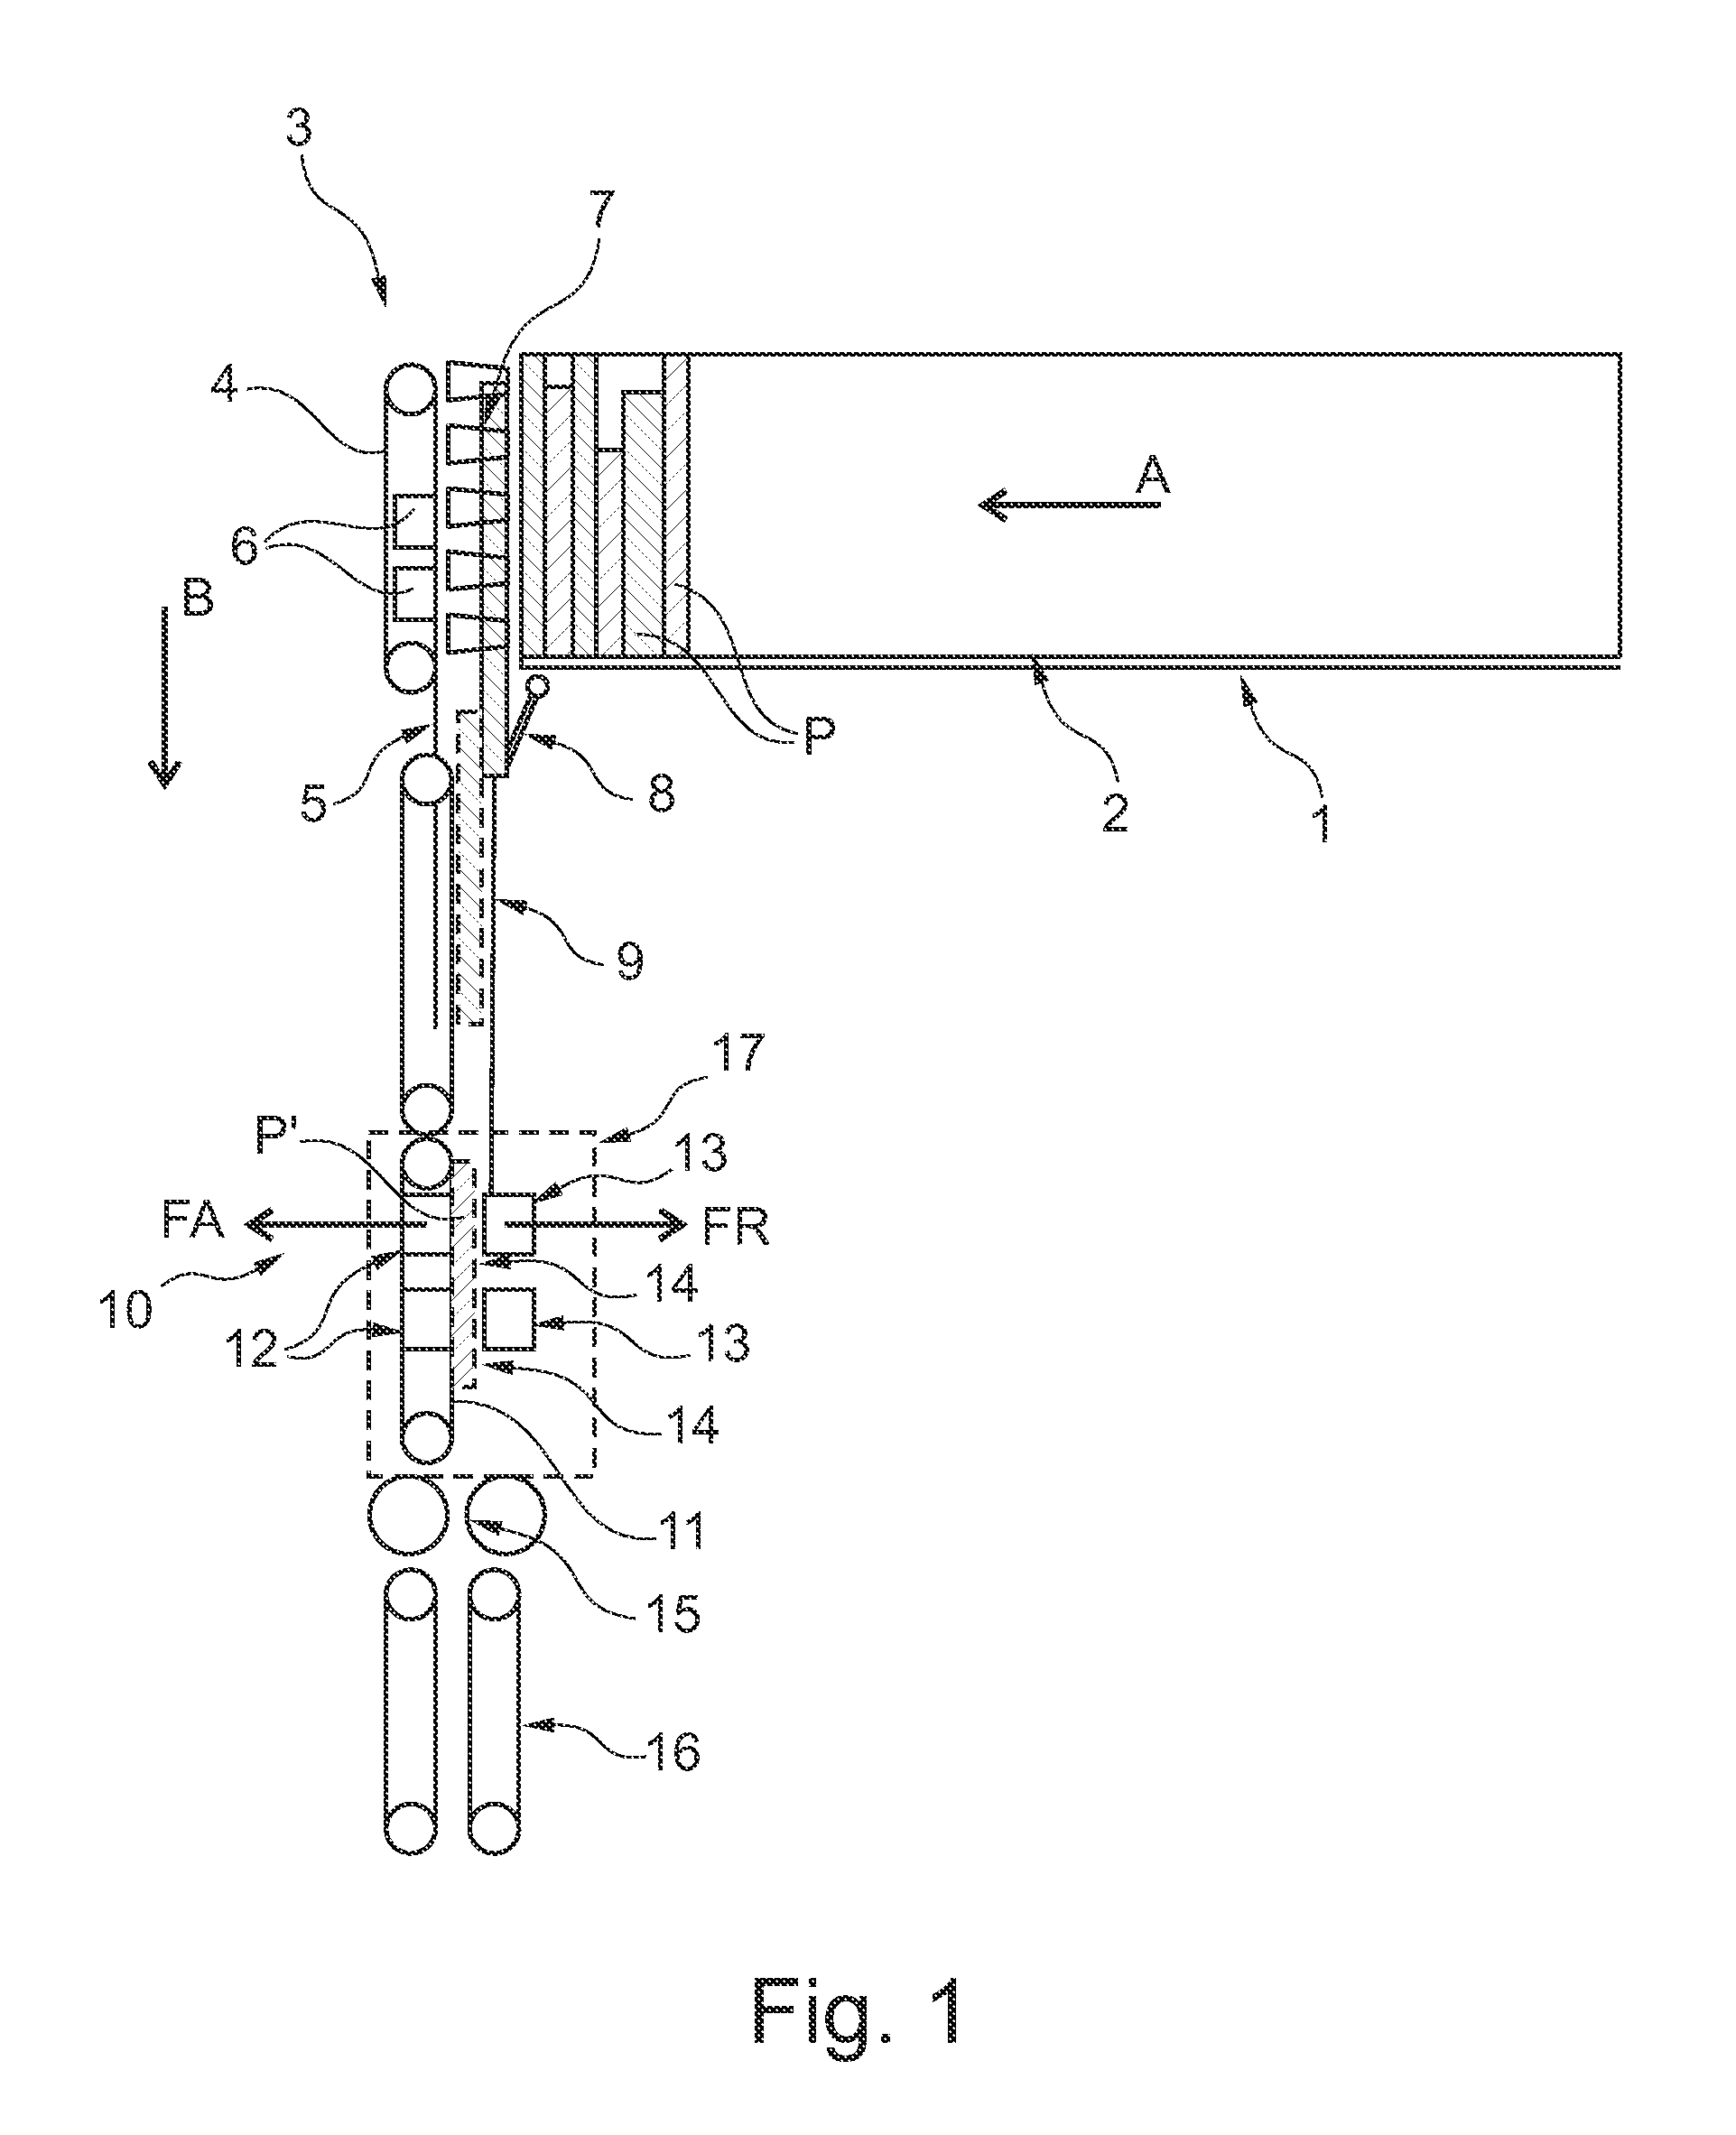 Flat-article feed device and a postal sorting machine